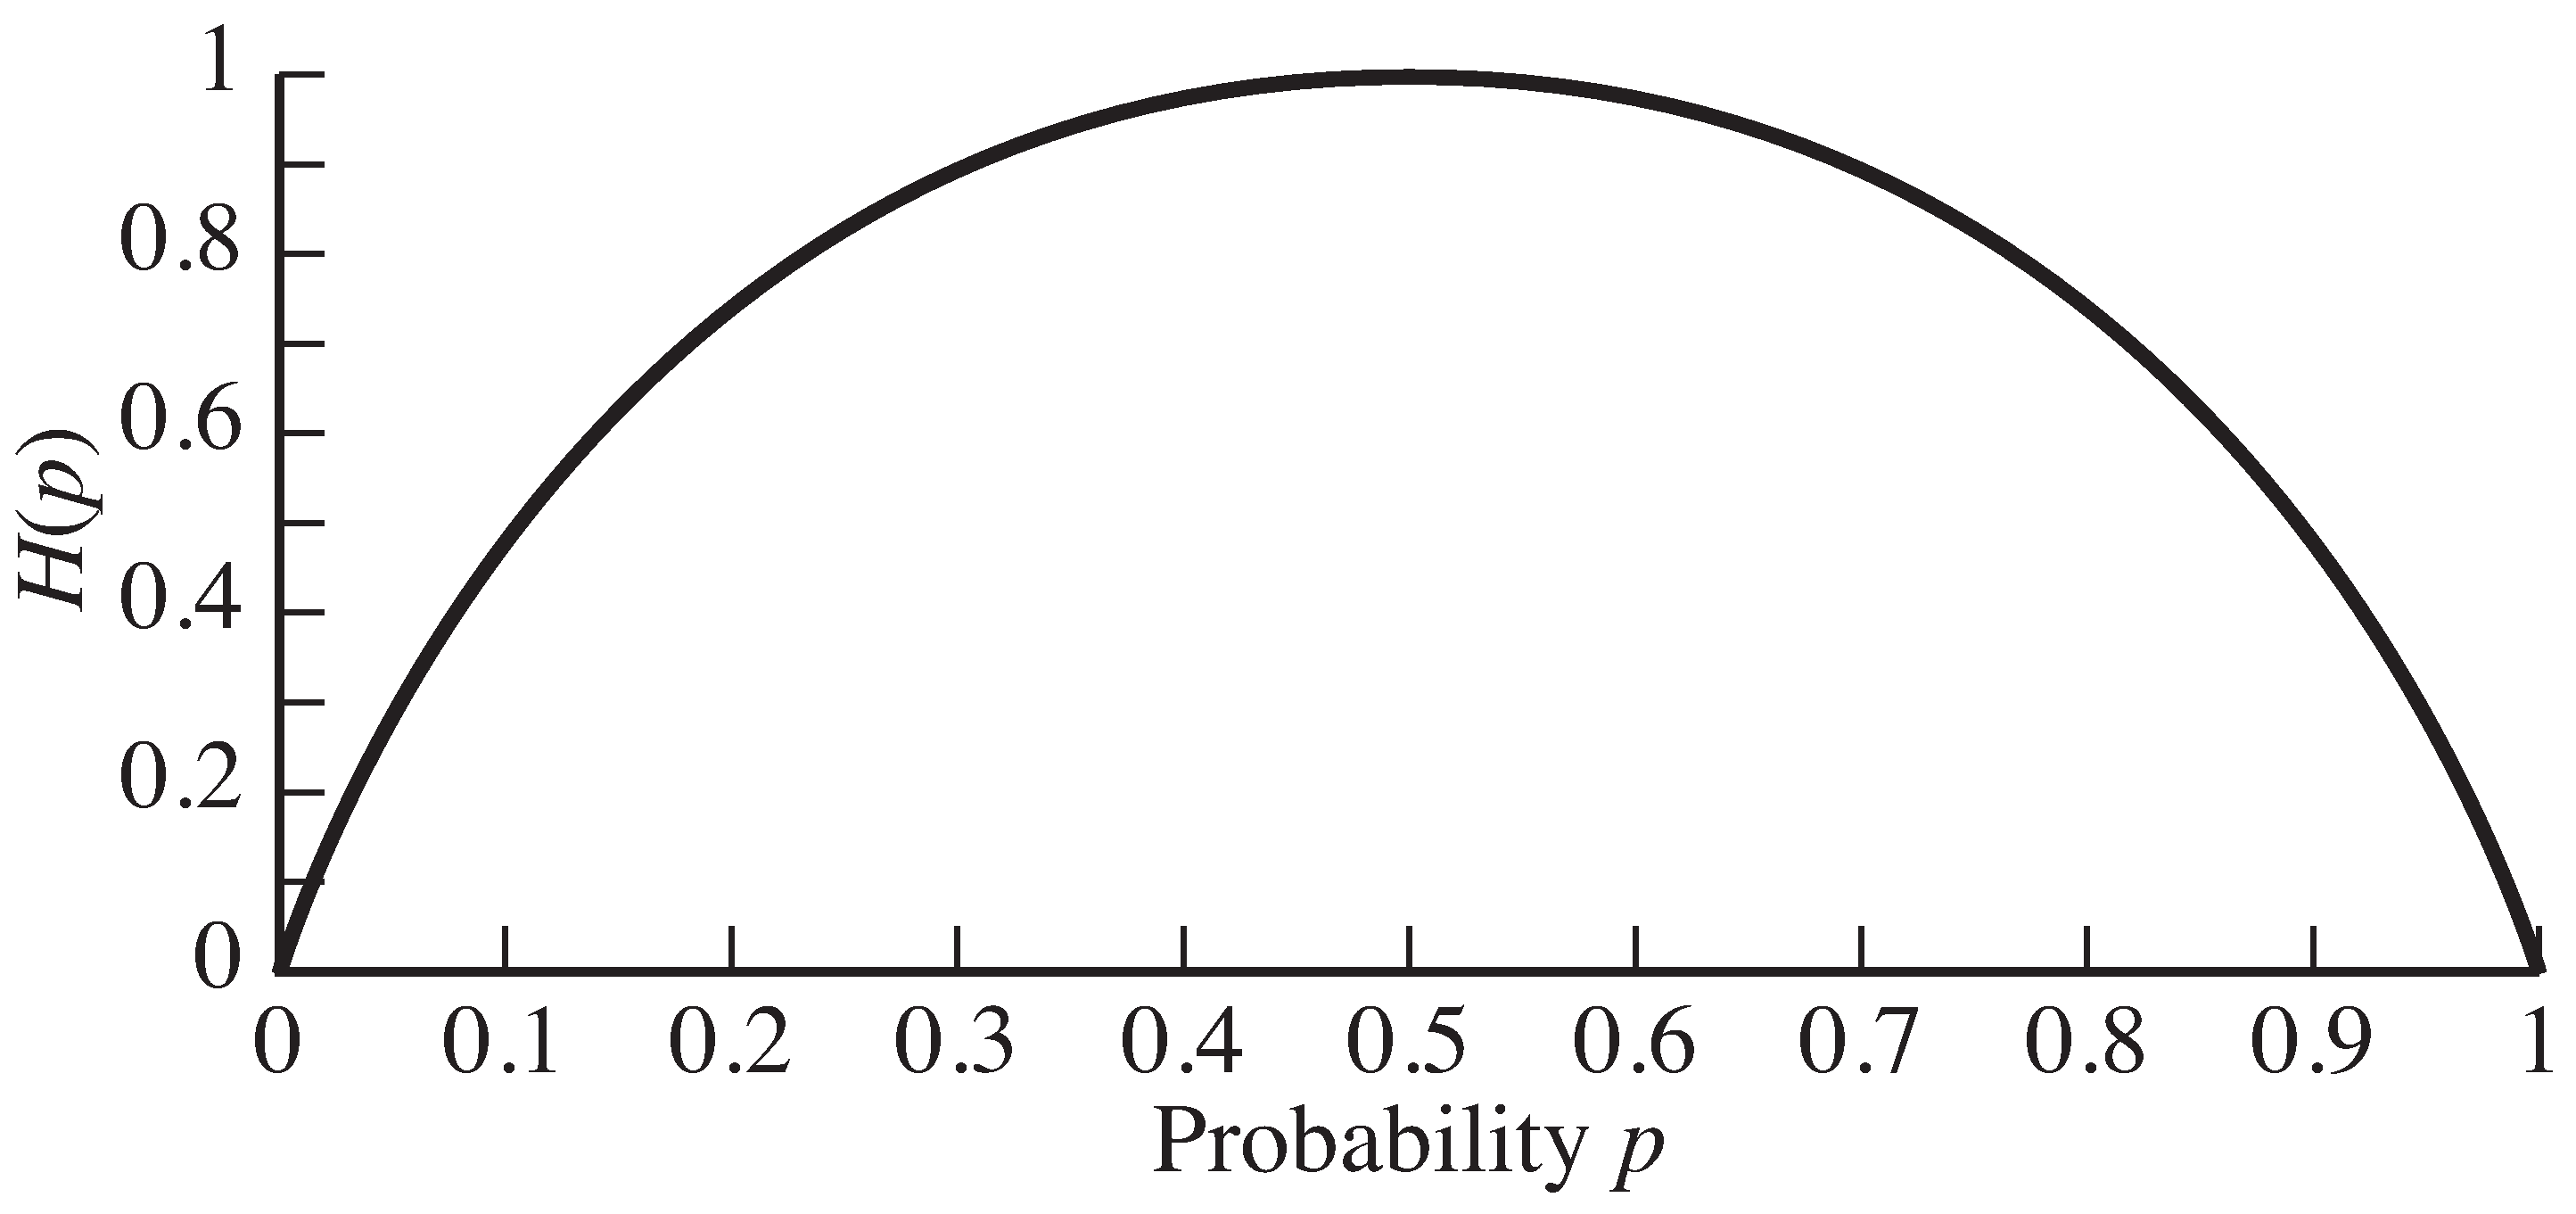 Entropy of a binary signal with probabilities p and 1-p.